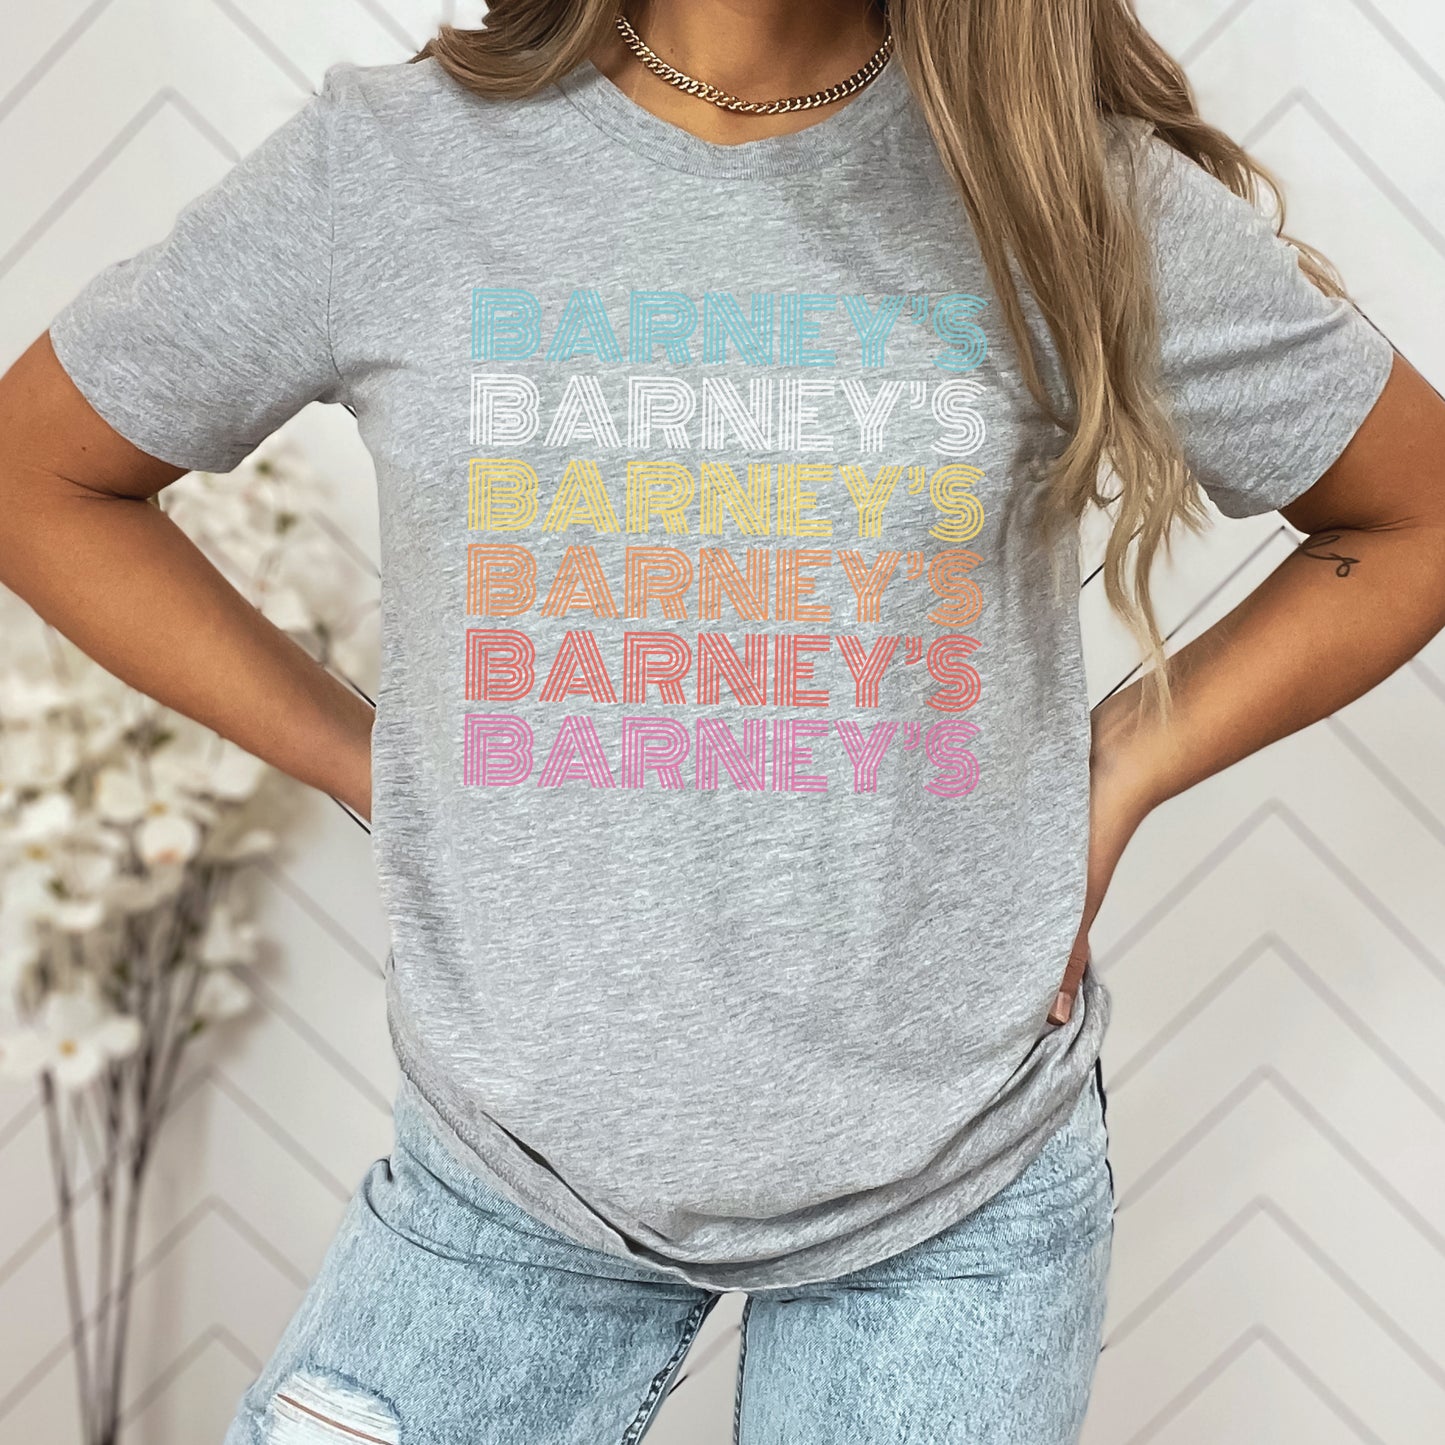 Barney's x6 Retro Hollywood | BARNEY'S BEANERY - Women's Retro Graphic Tee | Athletic Heather Bella+Canvas 3001 T-Shirt - Big Graphic On Front View Of Female Lifestyle Image